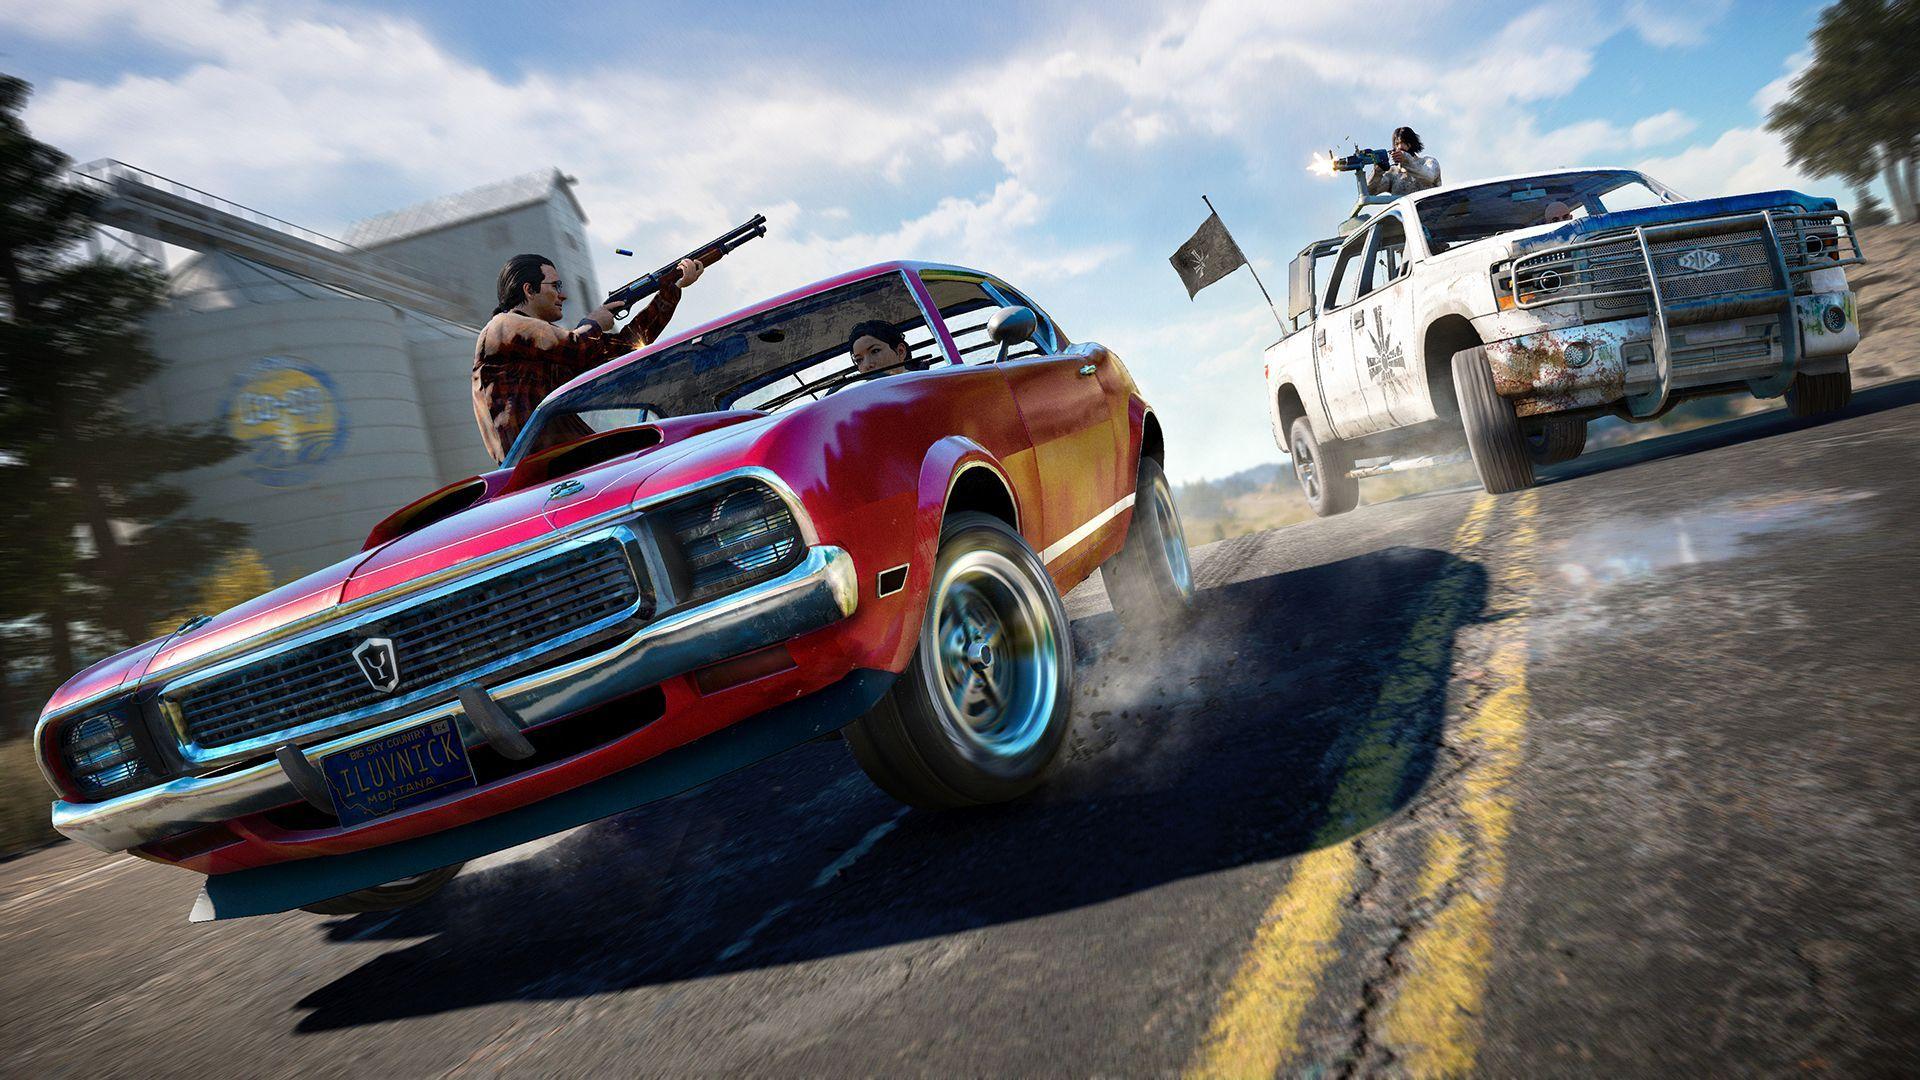 Far Cry 5 Gets New Screenshots and Artwork